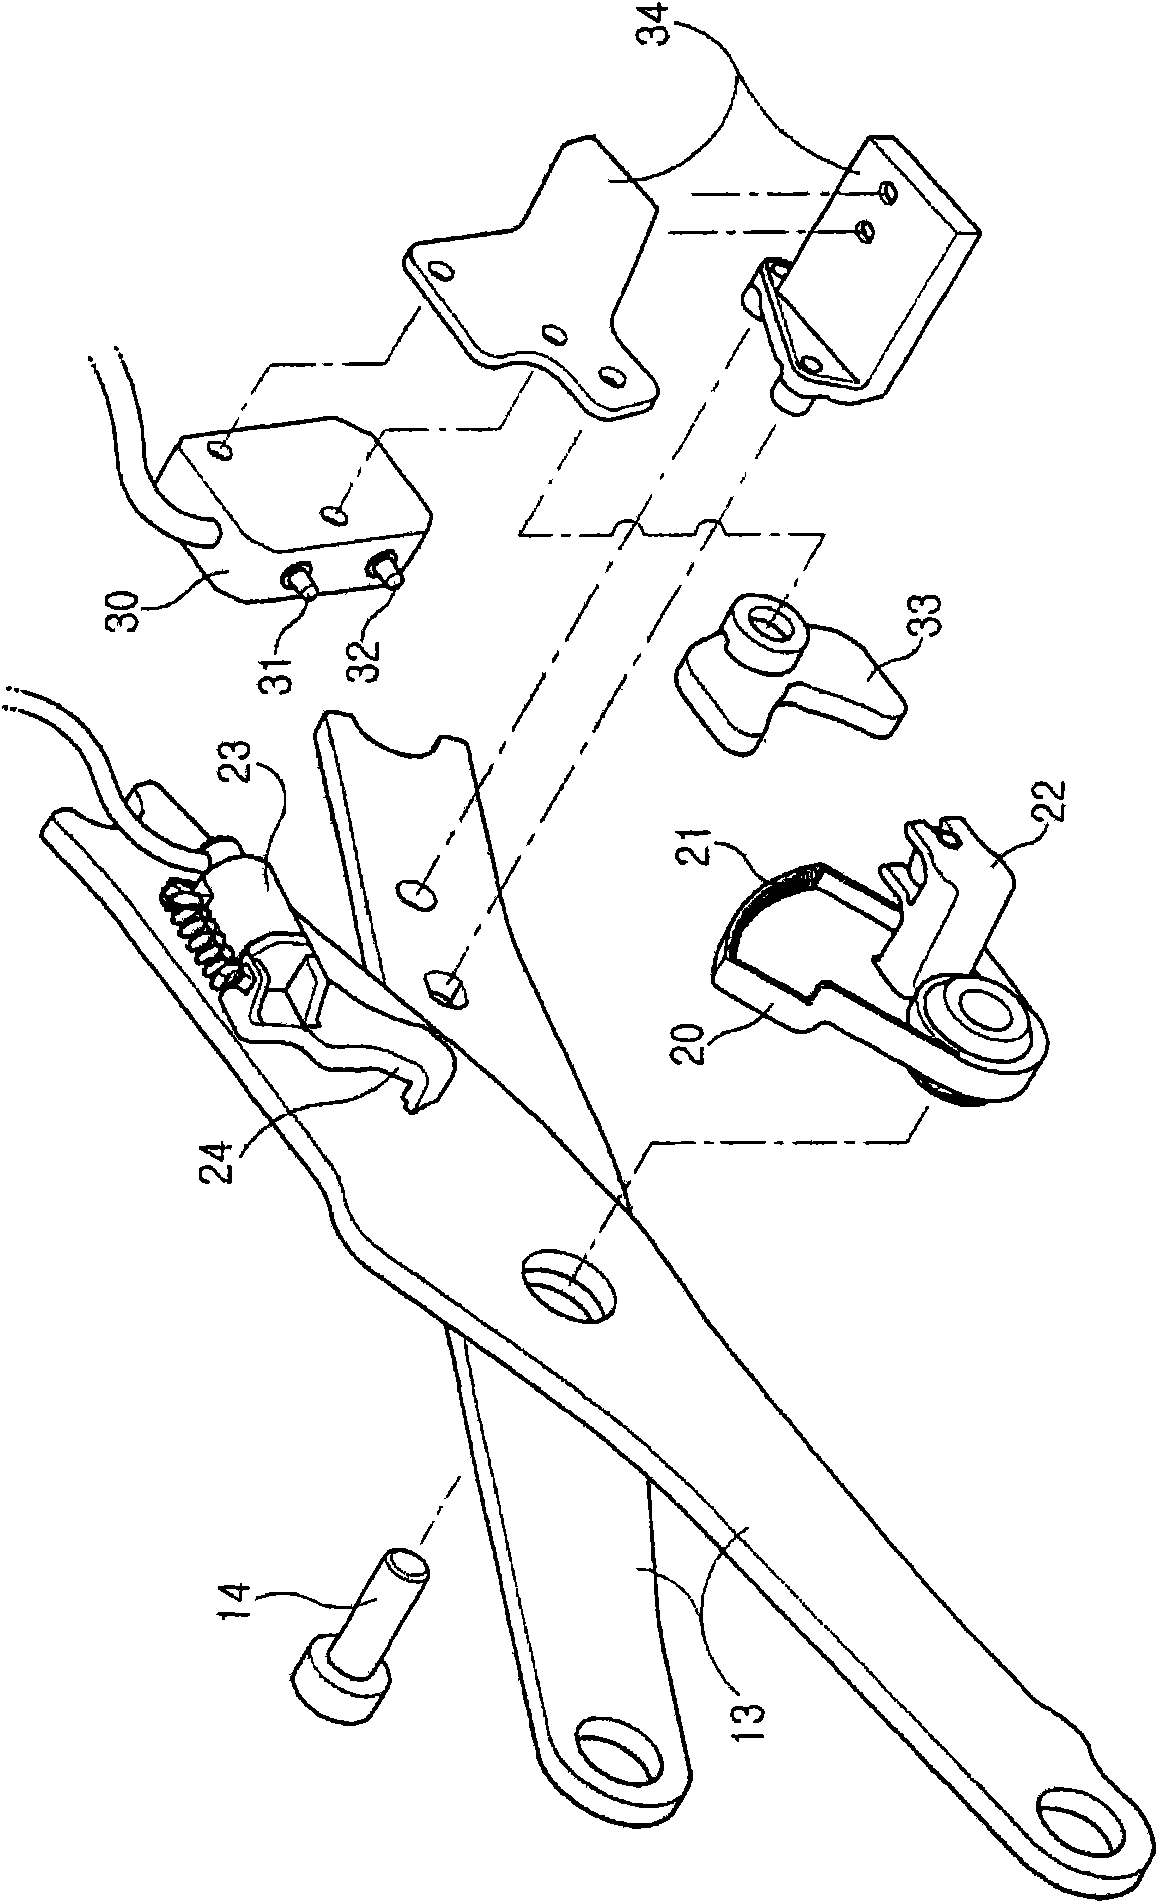 Height regulation control valve of cushion seat for vehicle